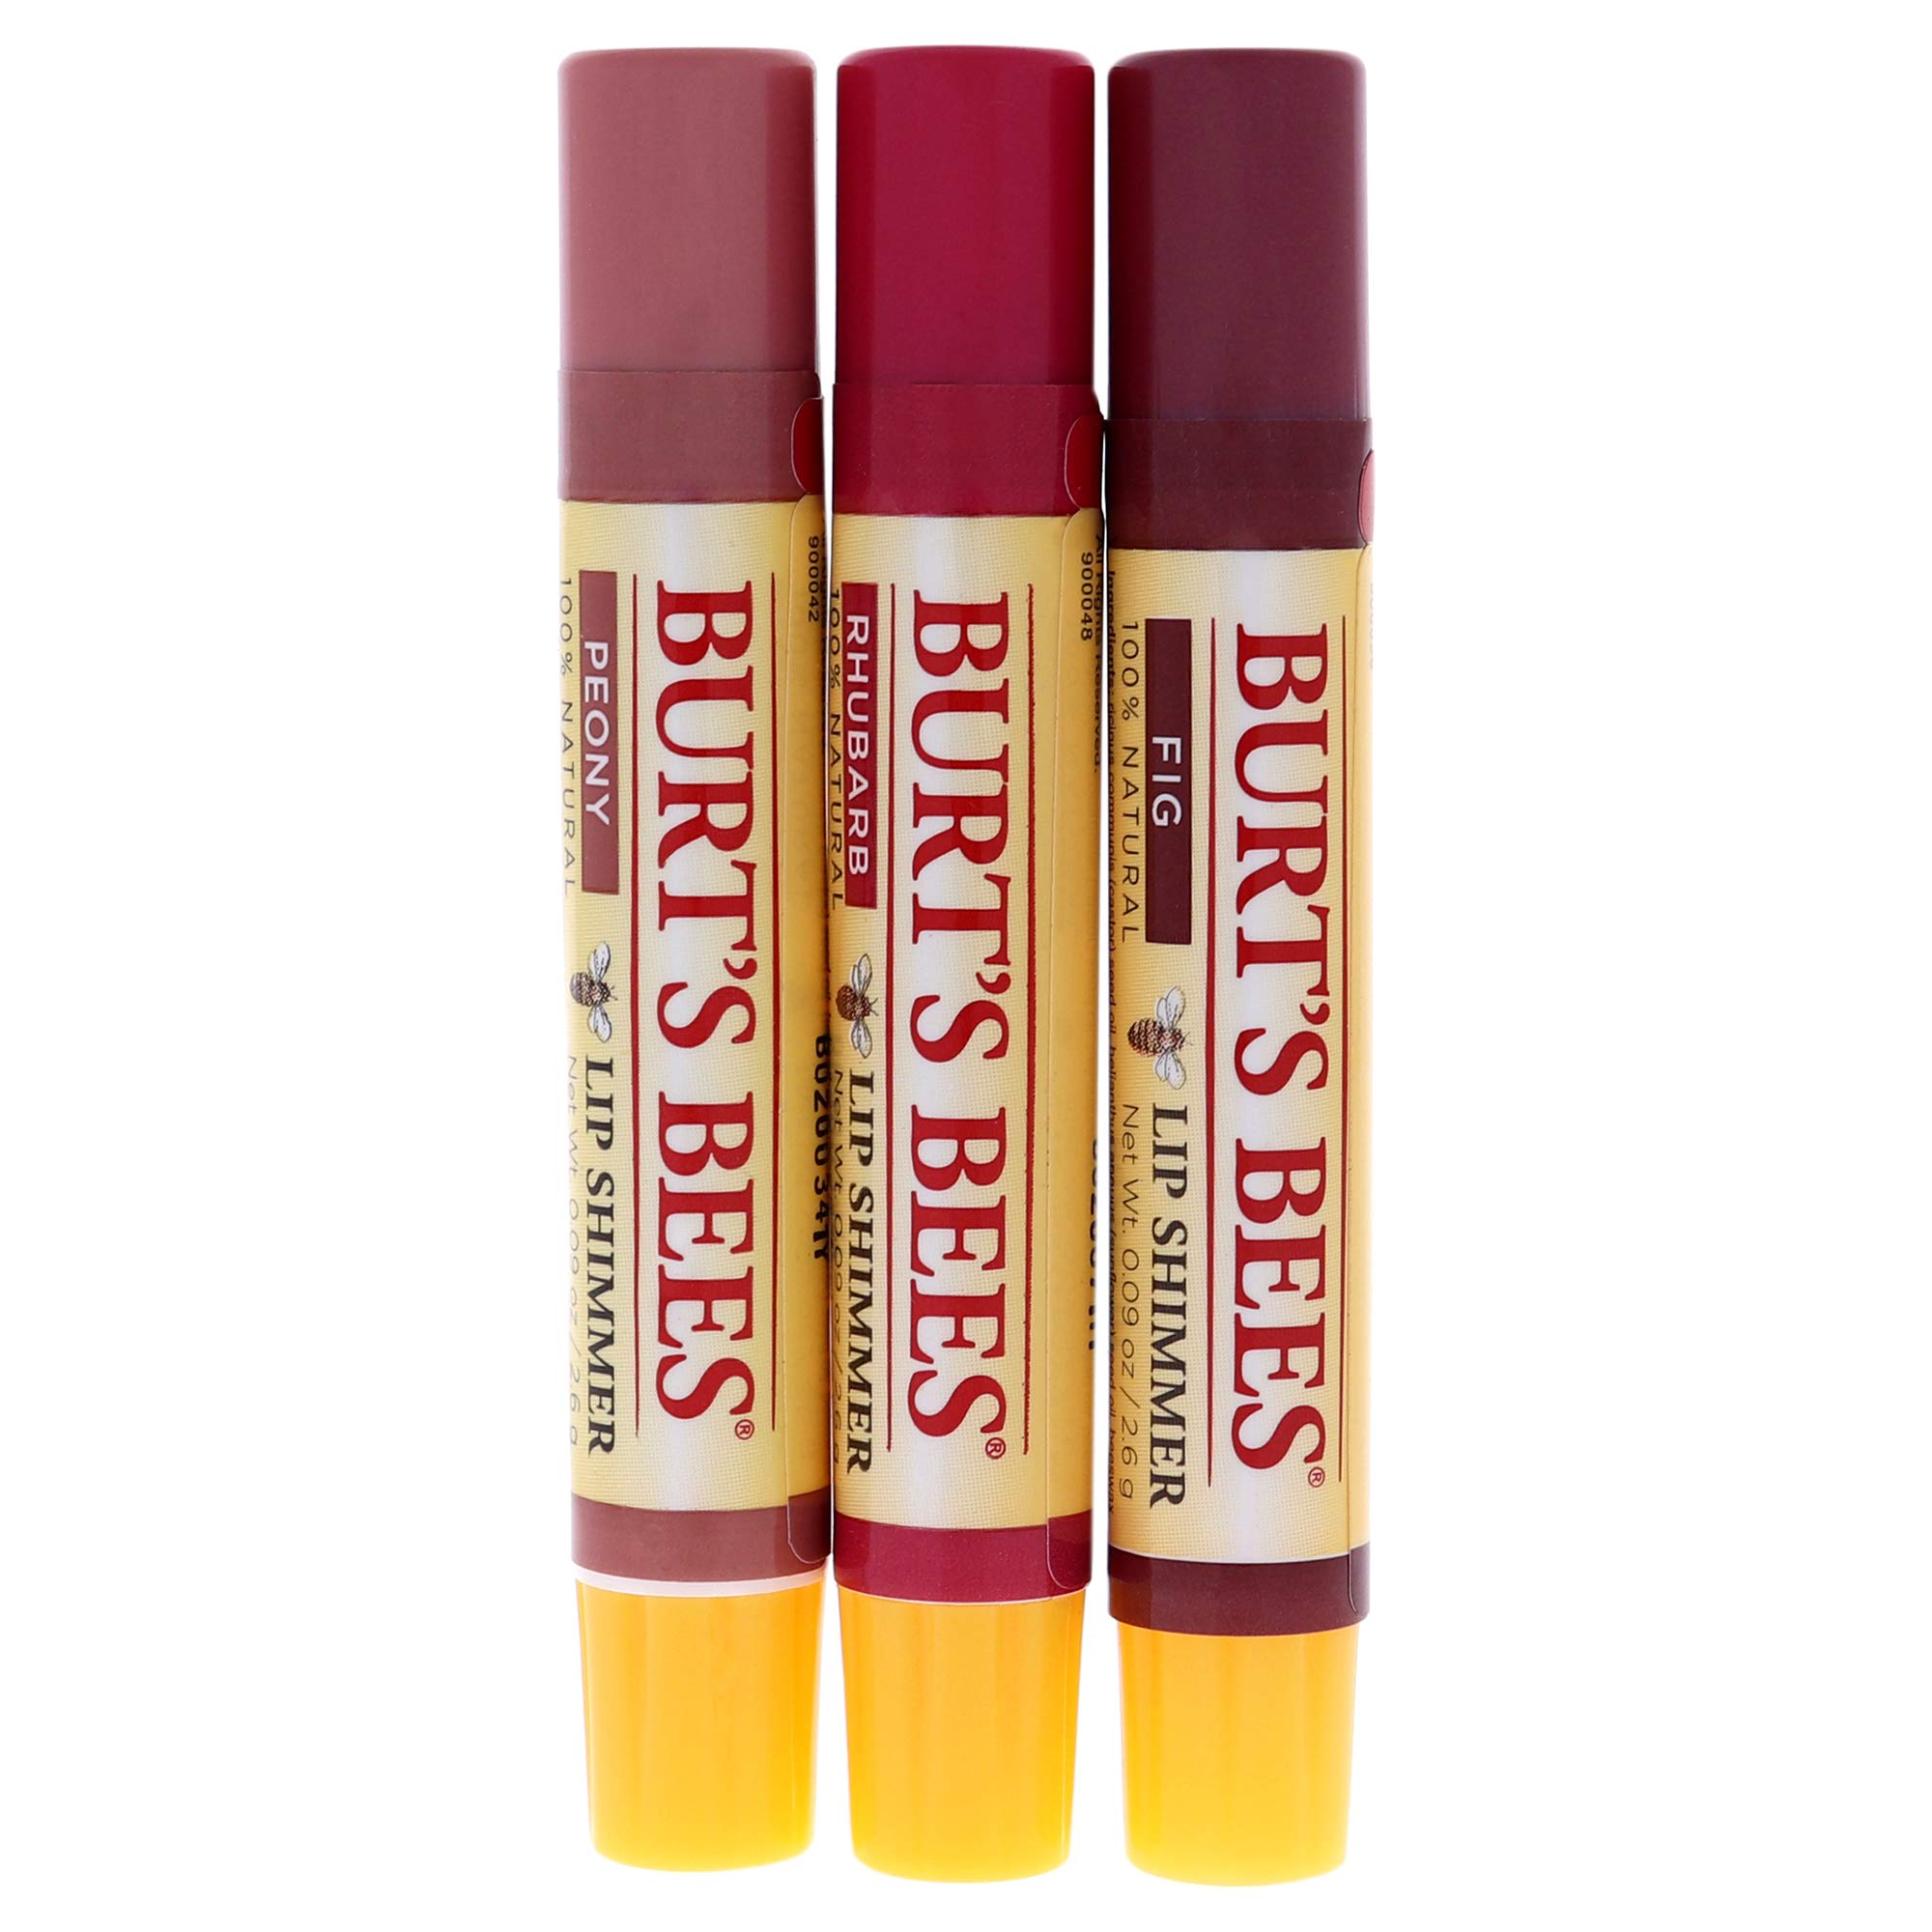 Burts Bees Kissable Color Warm Collection Unisex Lip Shimmer Peony, Rhubarb, Fig 3 oz